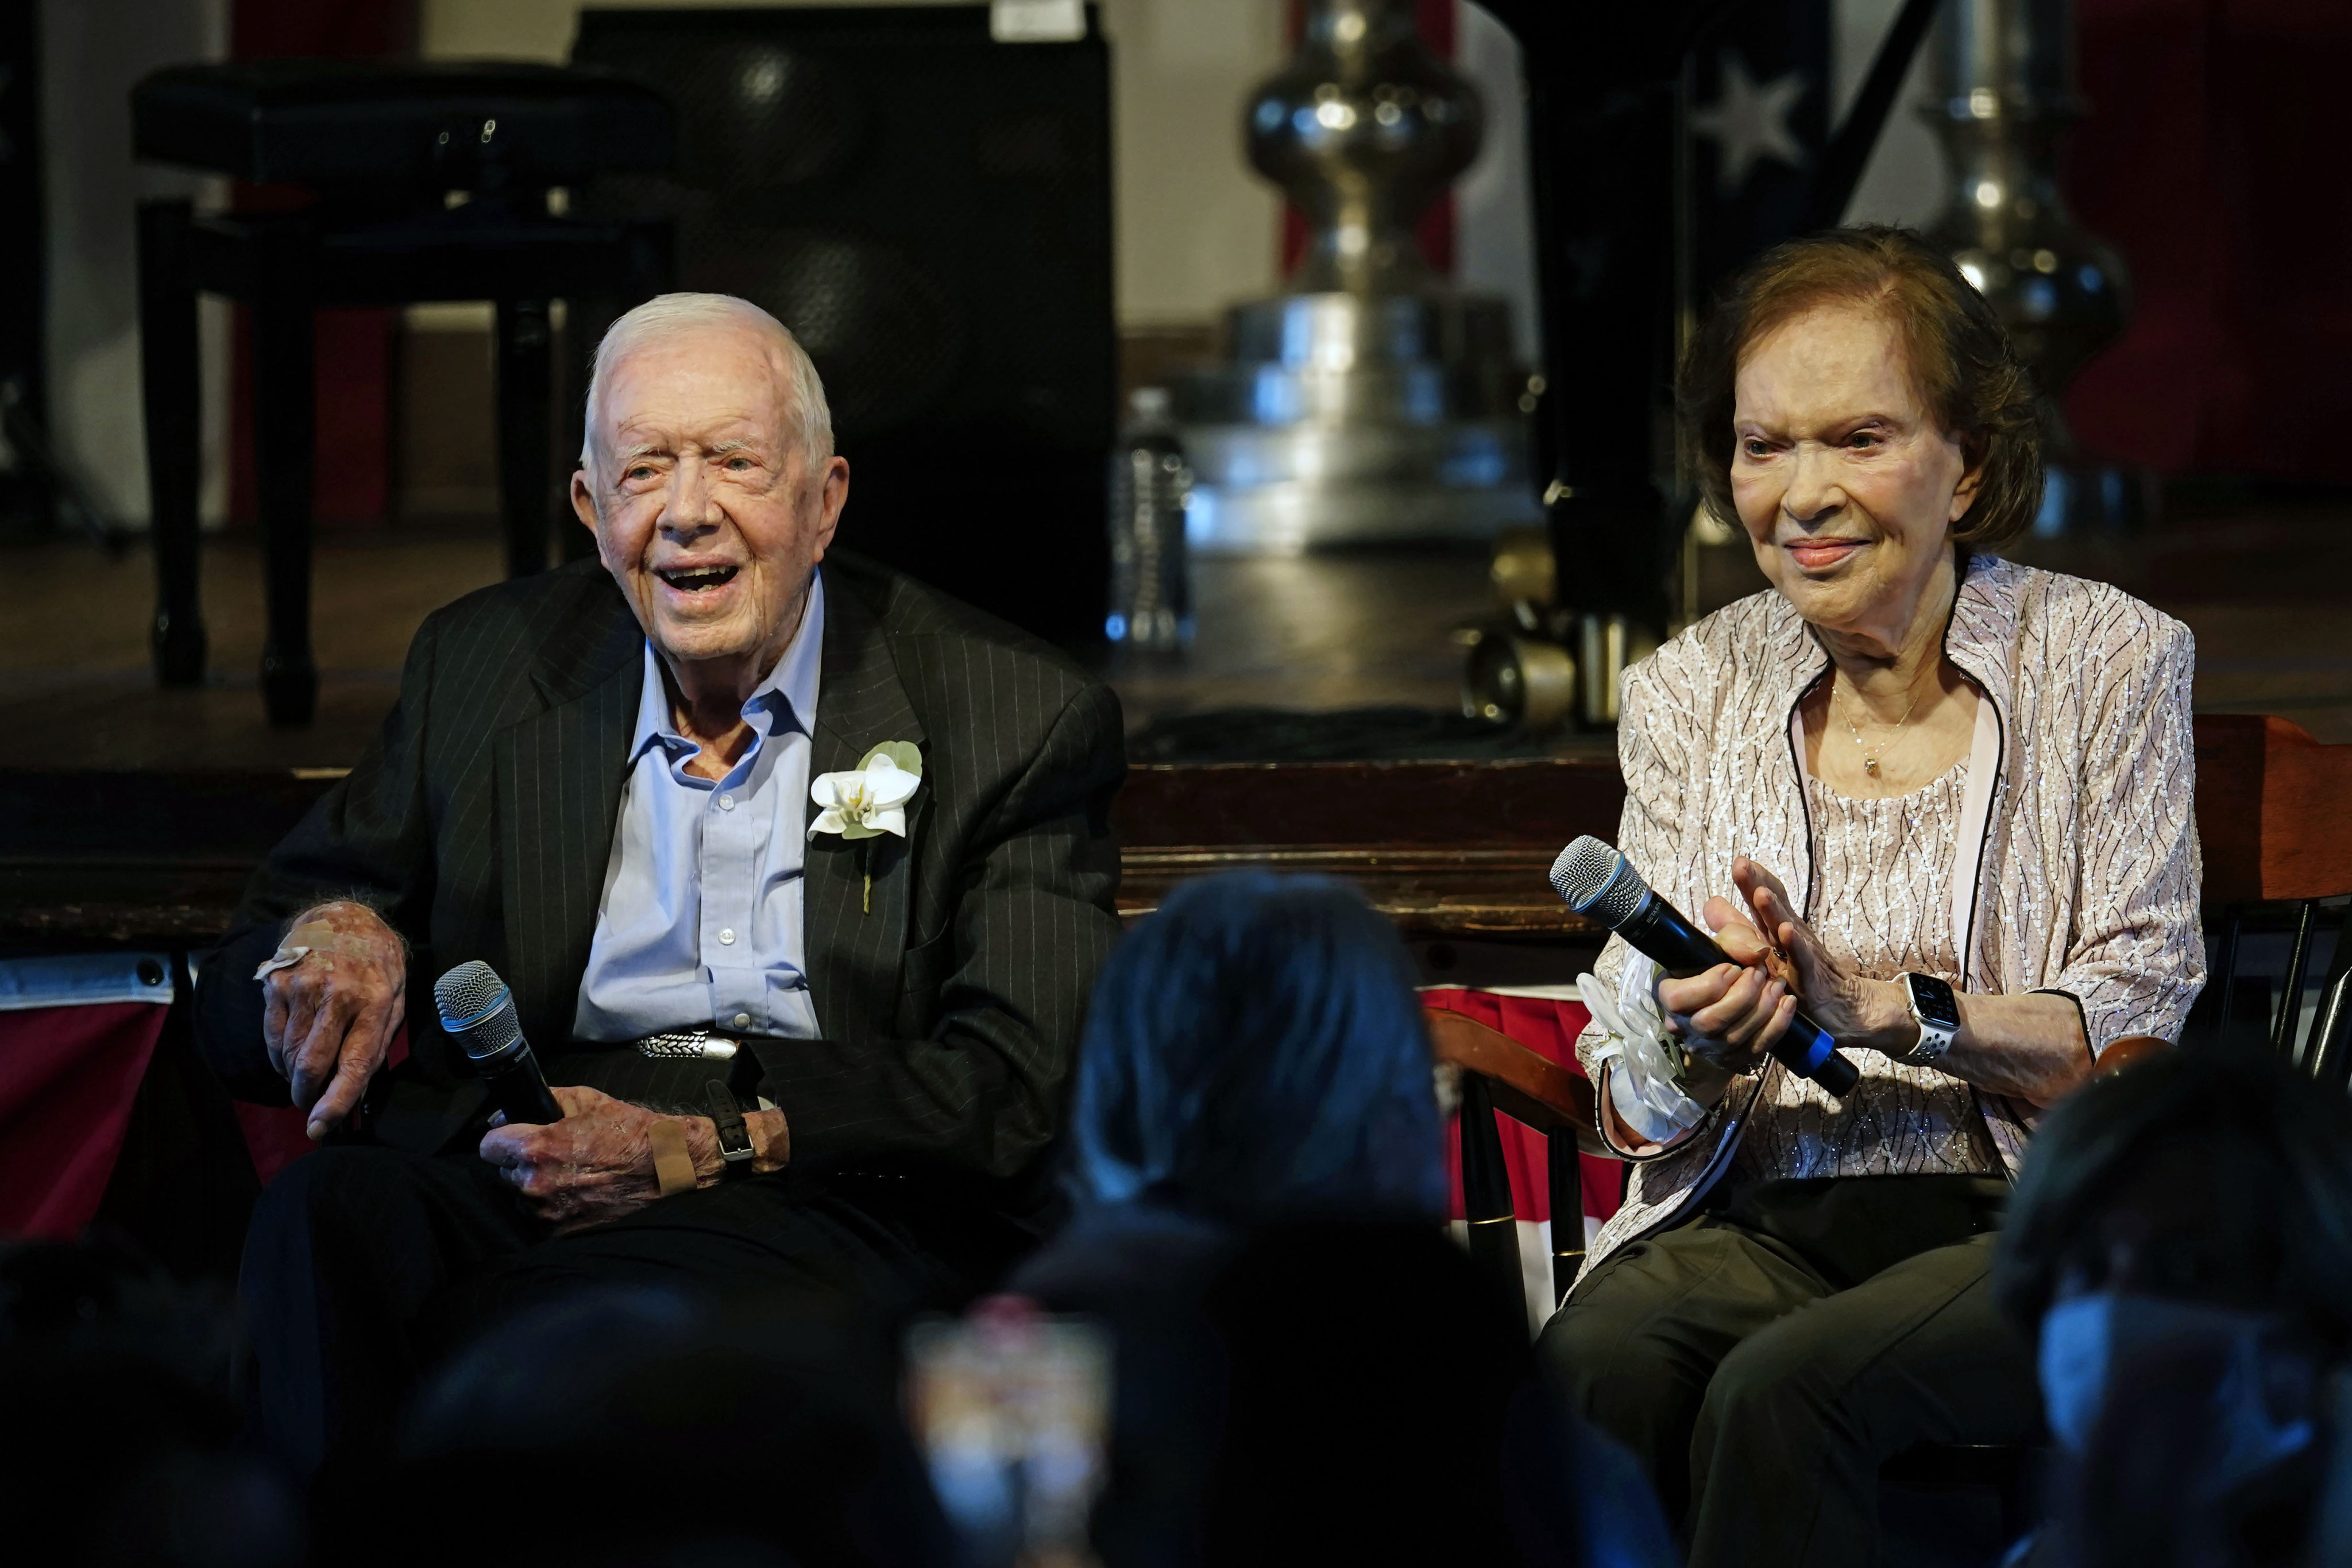 Former US president Jimmy Carter and former first lady Rosalynn Carter sit together during a reception to celebrate their 75th wedding anniversary in July 2021 in Plains, Georgia. Photo: AP